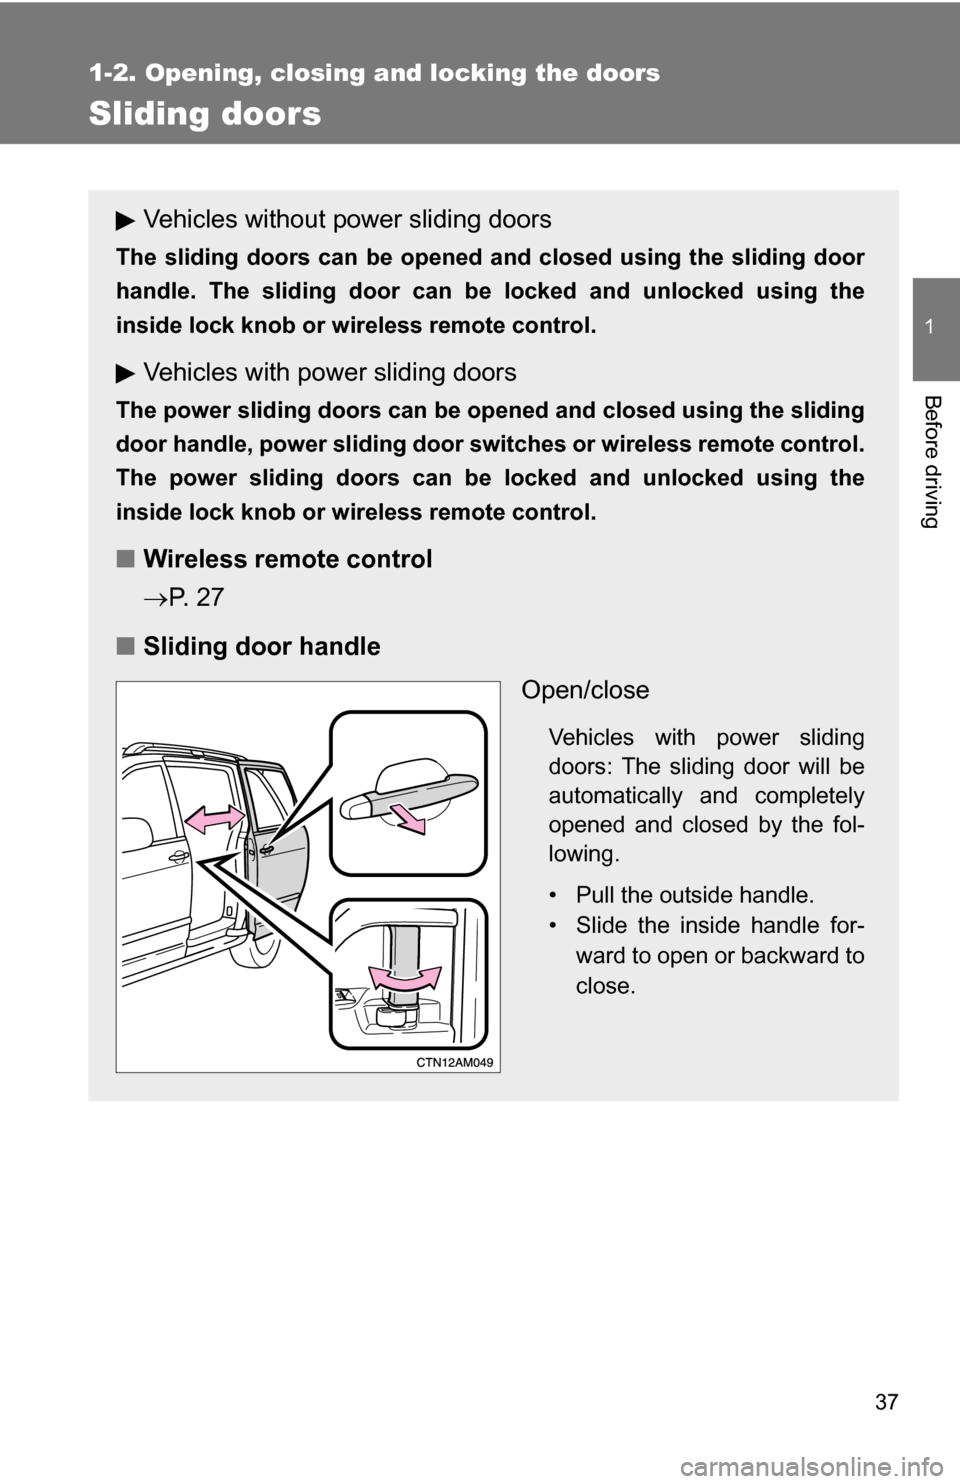 TOYOTA SIENNA 2009 XL20 / 2.G Owners Guide 37
1
1-2. Opening, closing and locking the doors
Before driving
Sliding doors
Vehicles without power sliding doors
The sliding doors can be opened and closed using the sliding door
handle. The sliding